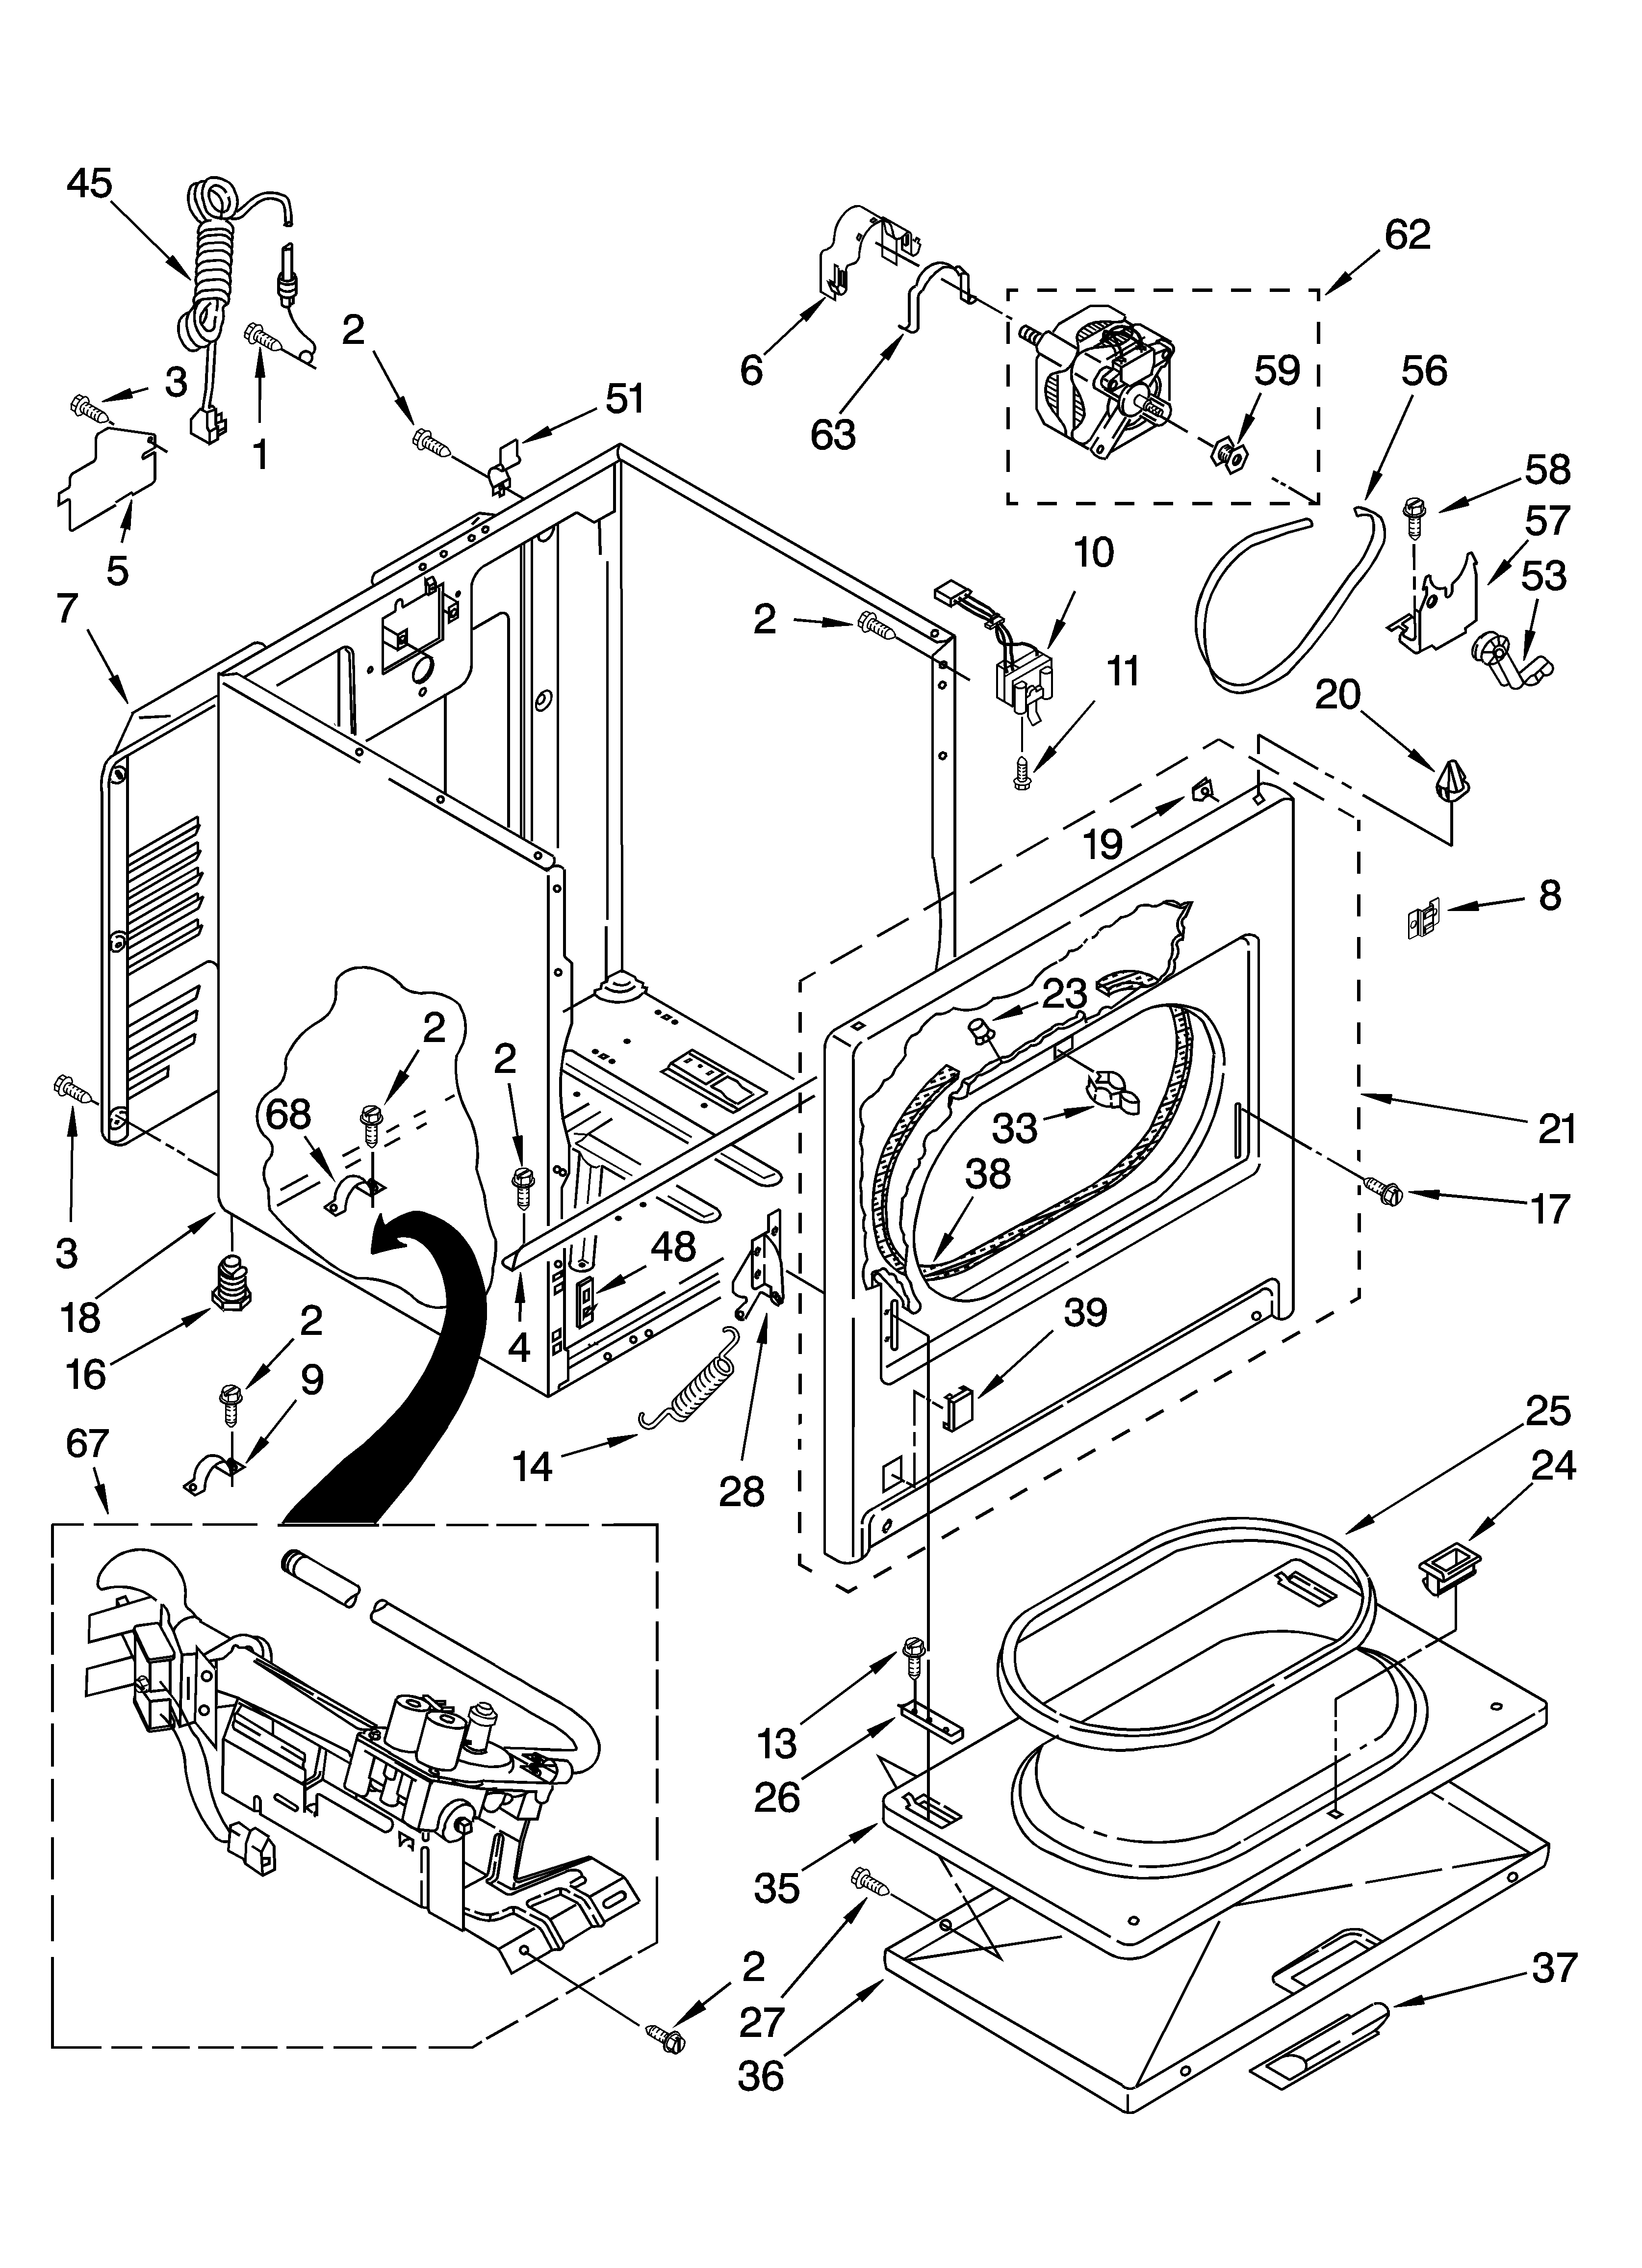 Wire Diagram For Whirlpool Dryer